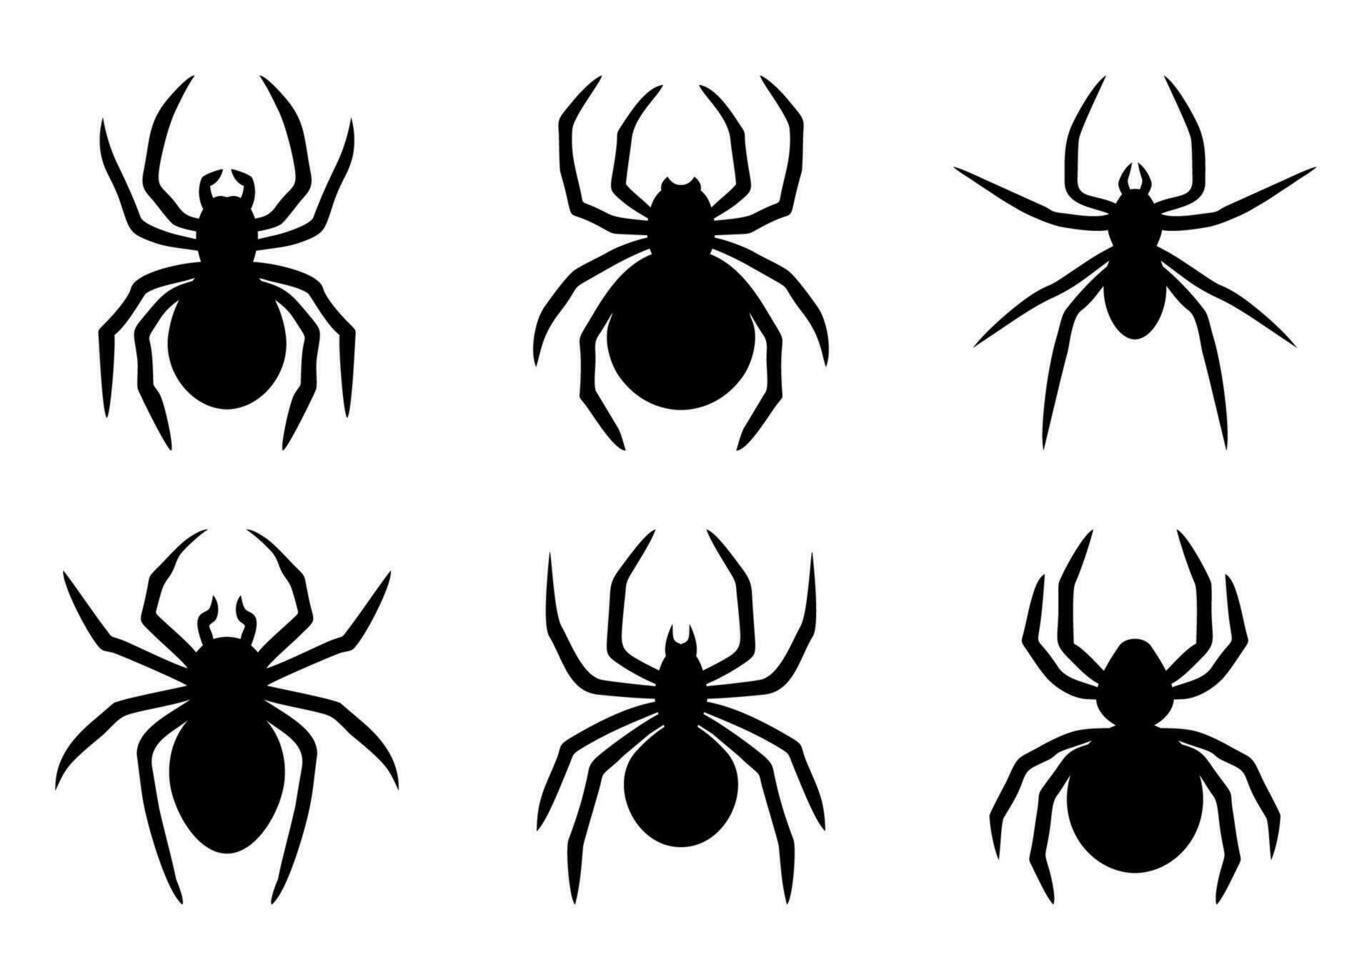 Set of black spider icons. Spider silhouette collection isolated on white background. Vector illustration